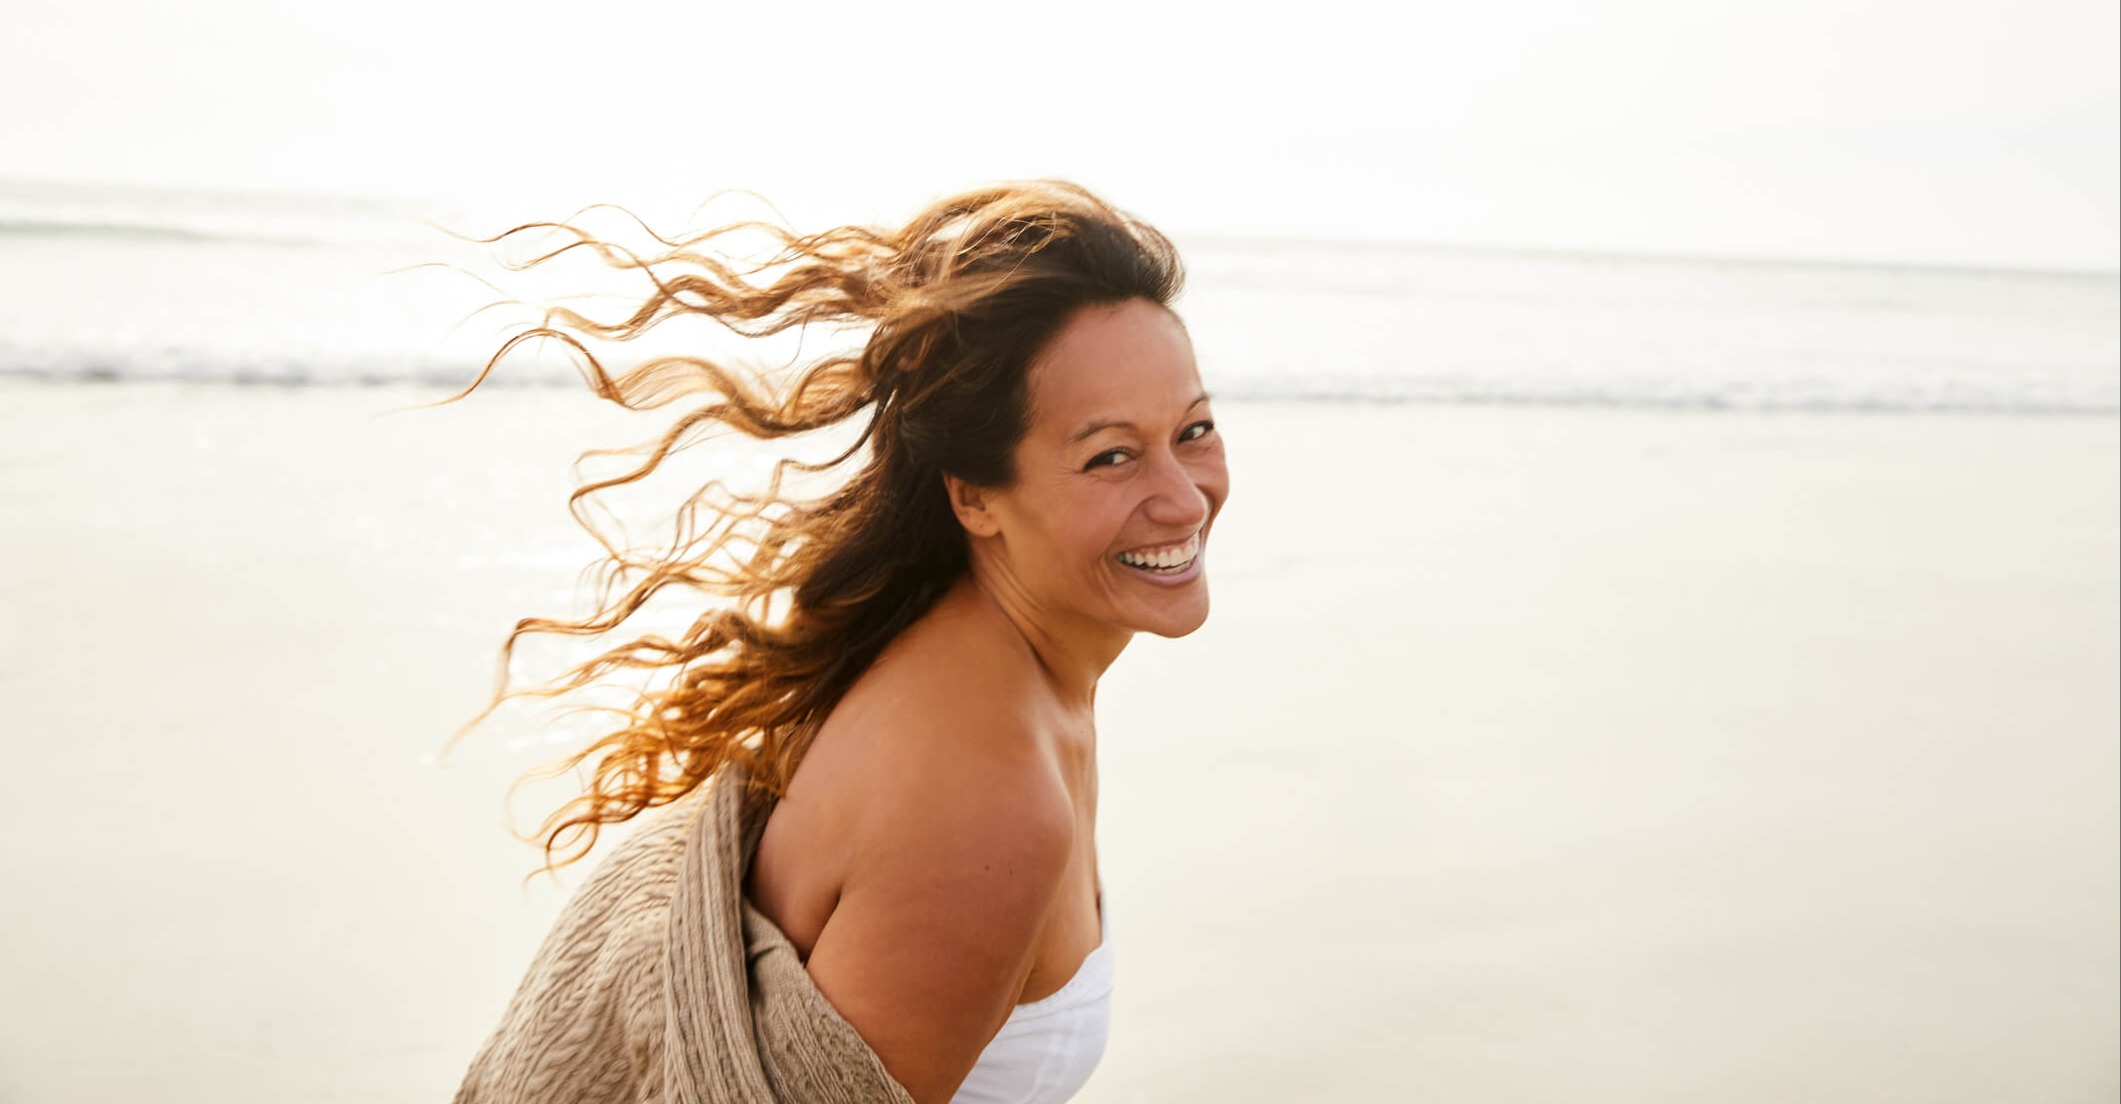 Smiling woman at the beach